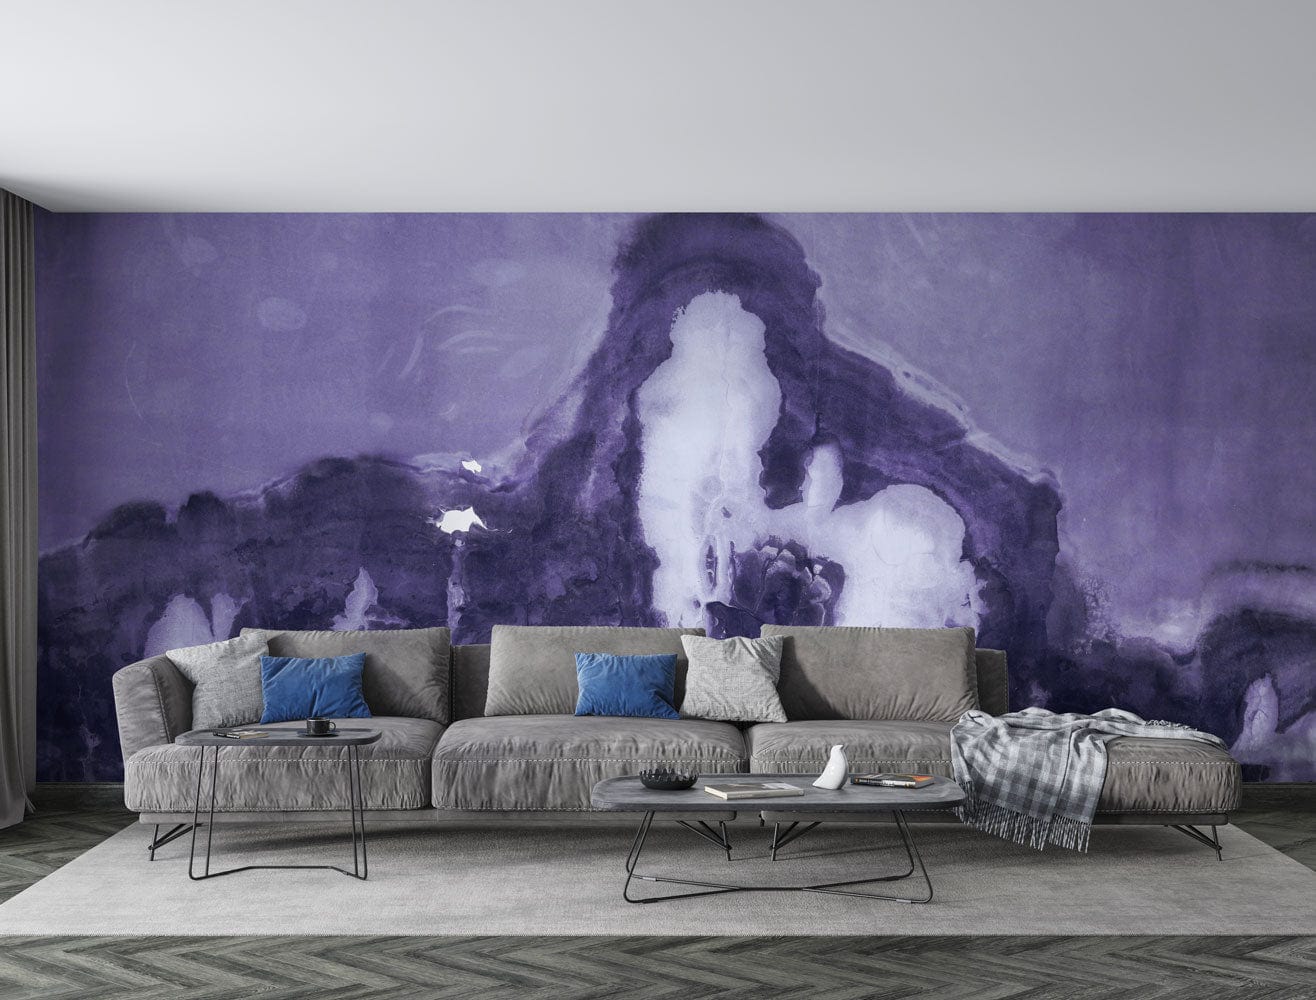 Marble Wallpaper Mural in Melting Purple and White for Decorating the Living Room